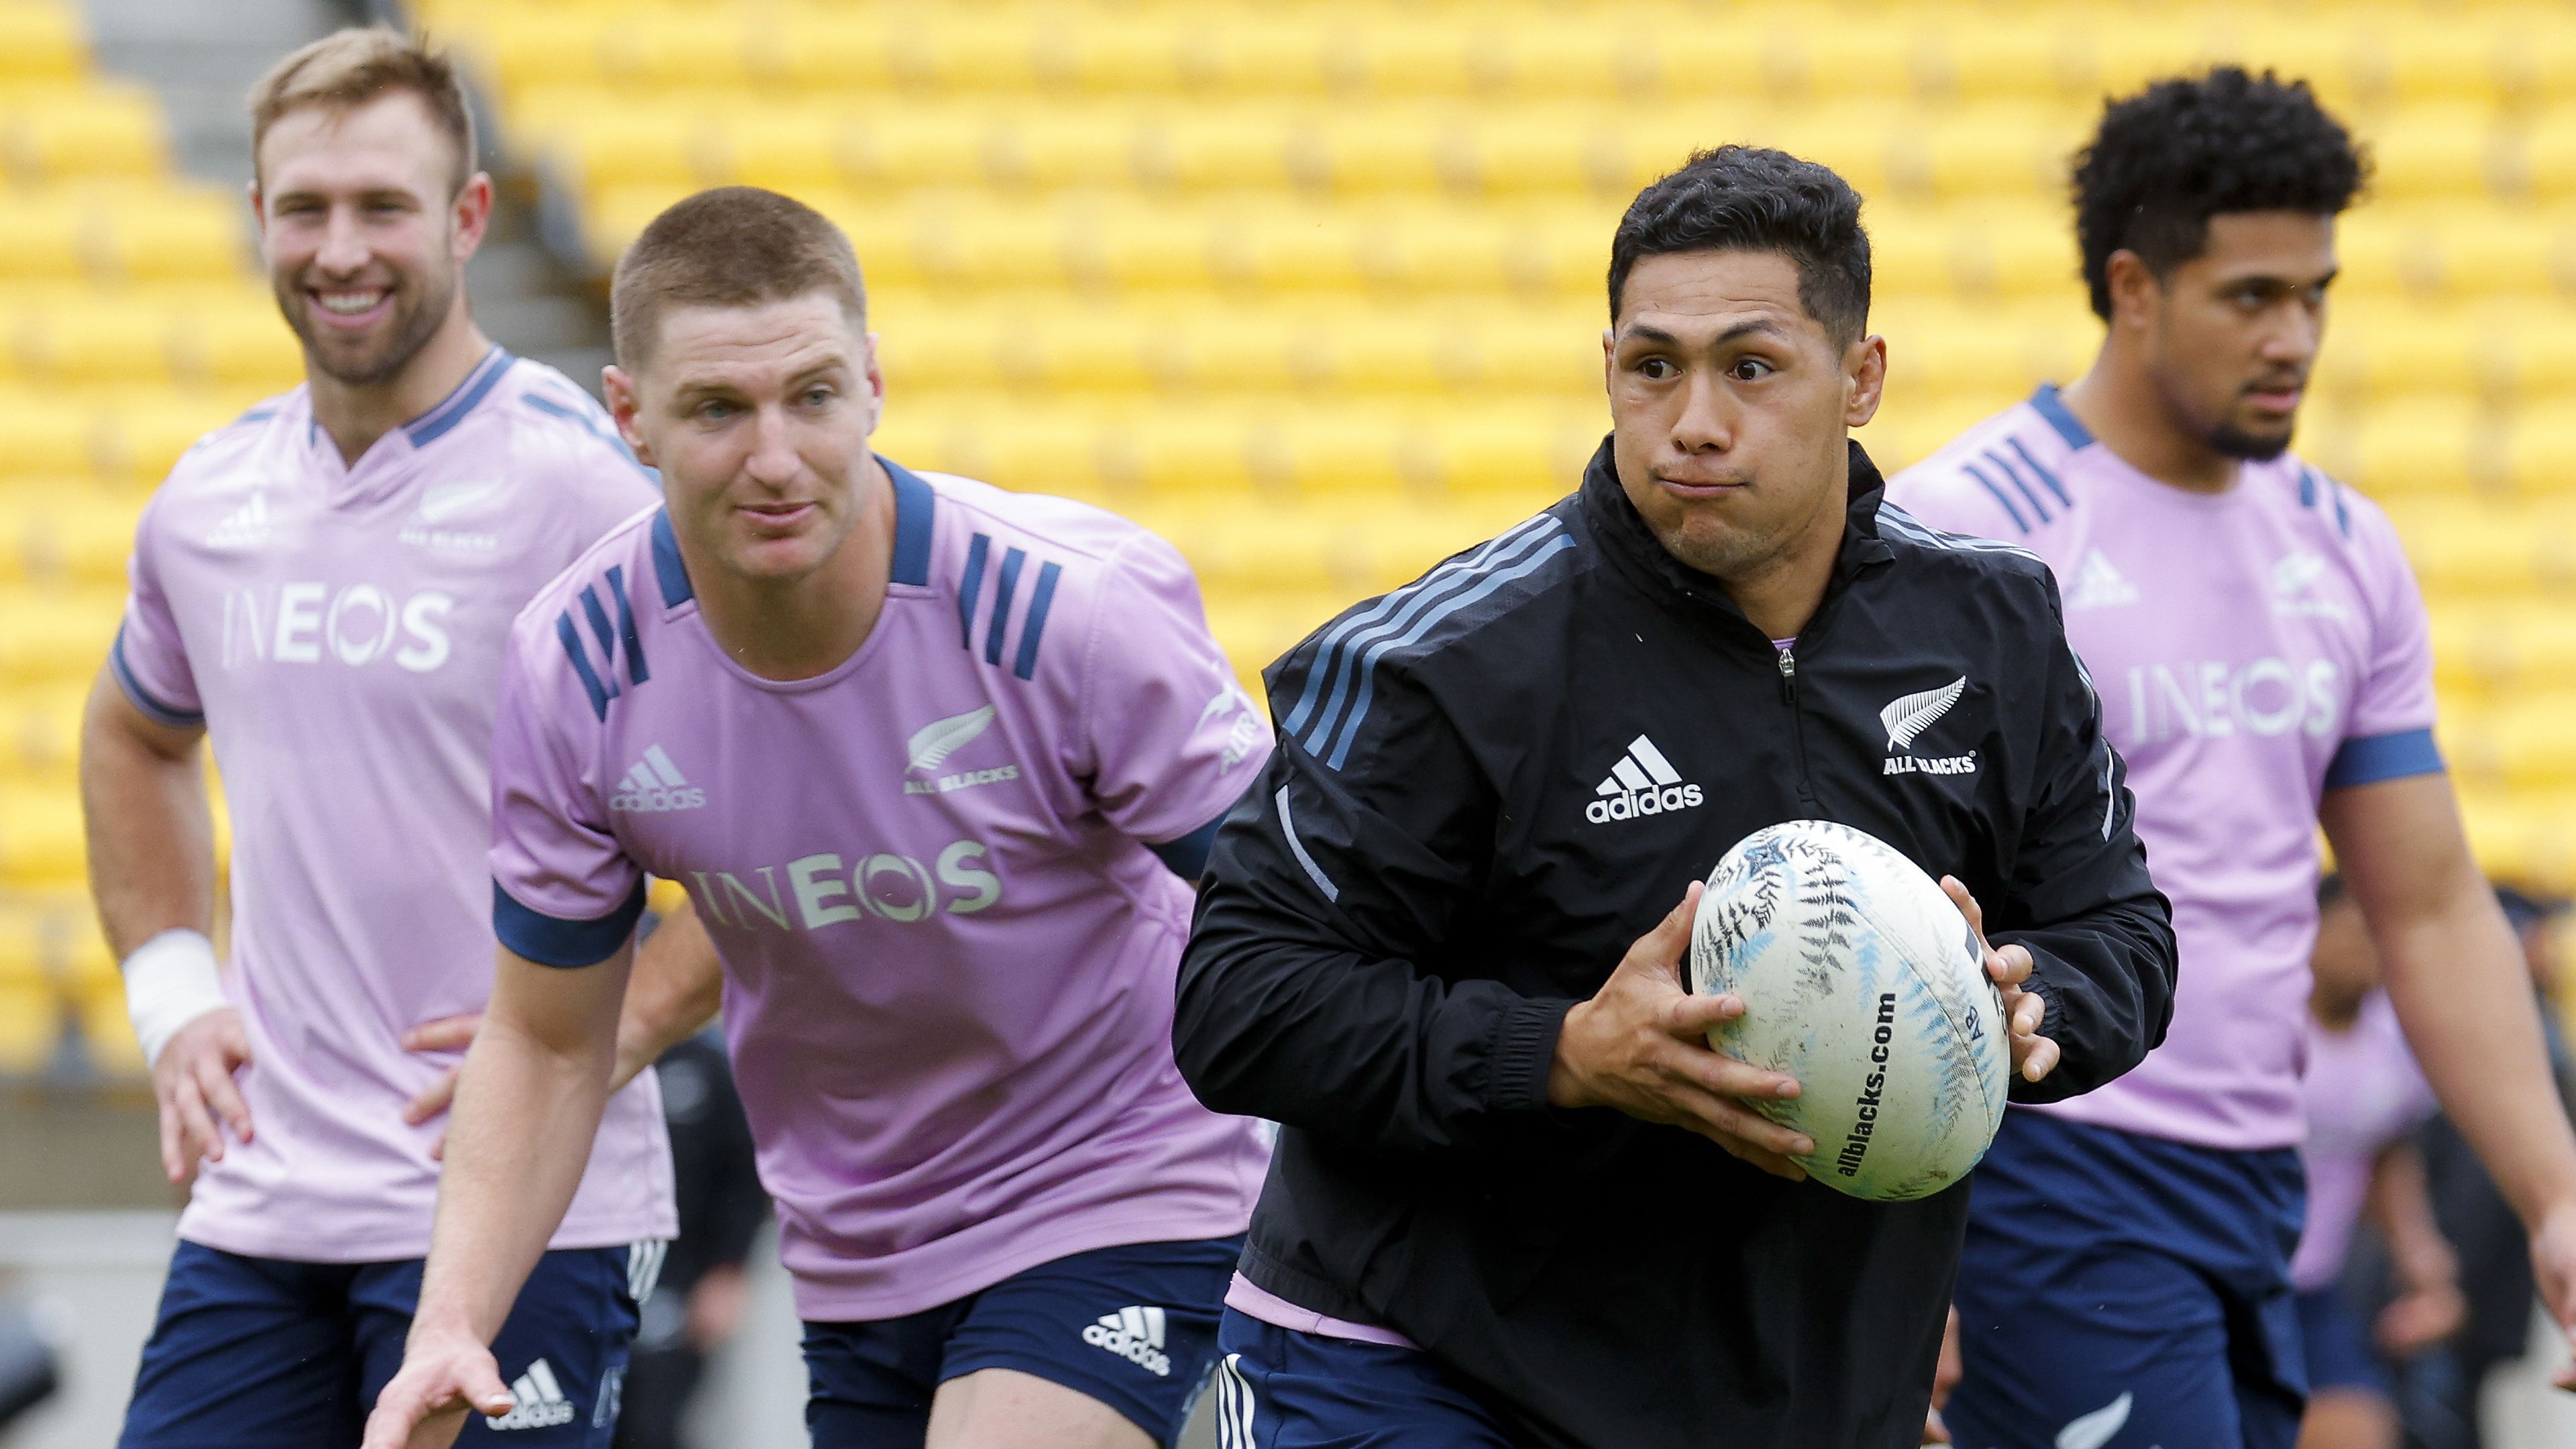 Roger Tuivasa-Sheck in action during an All Blacks training session.